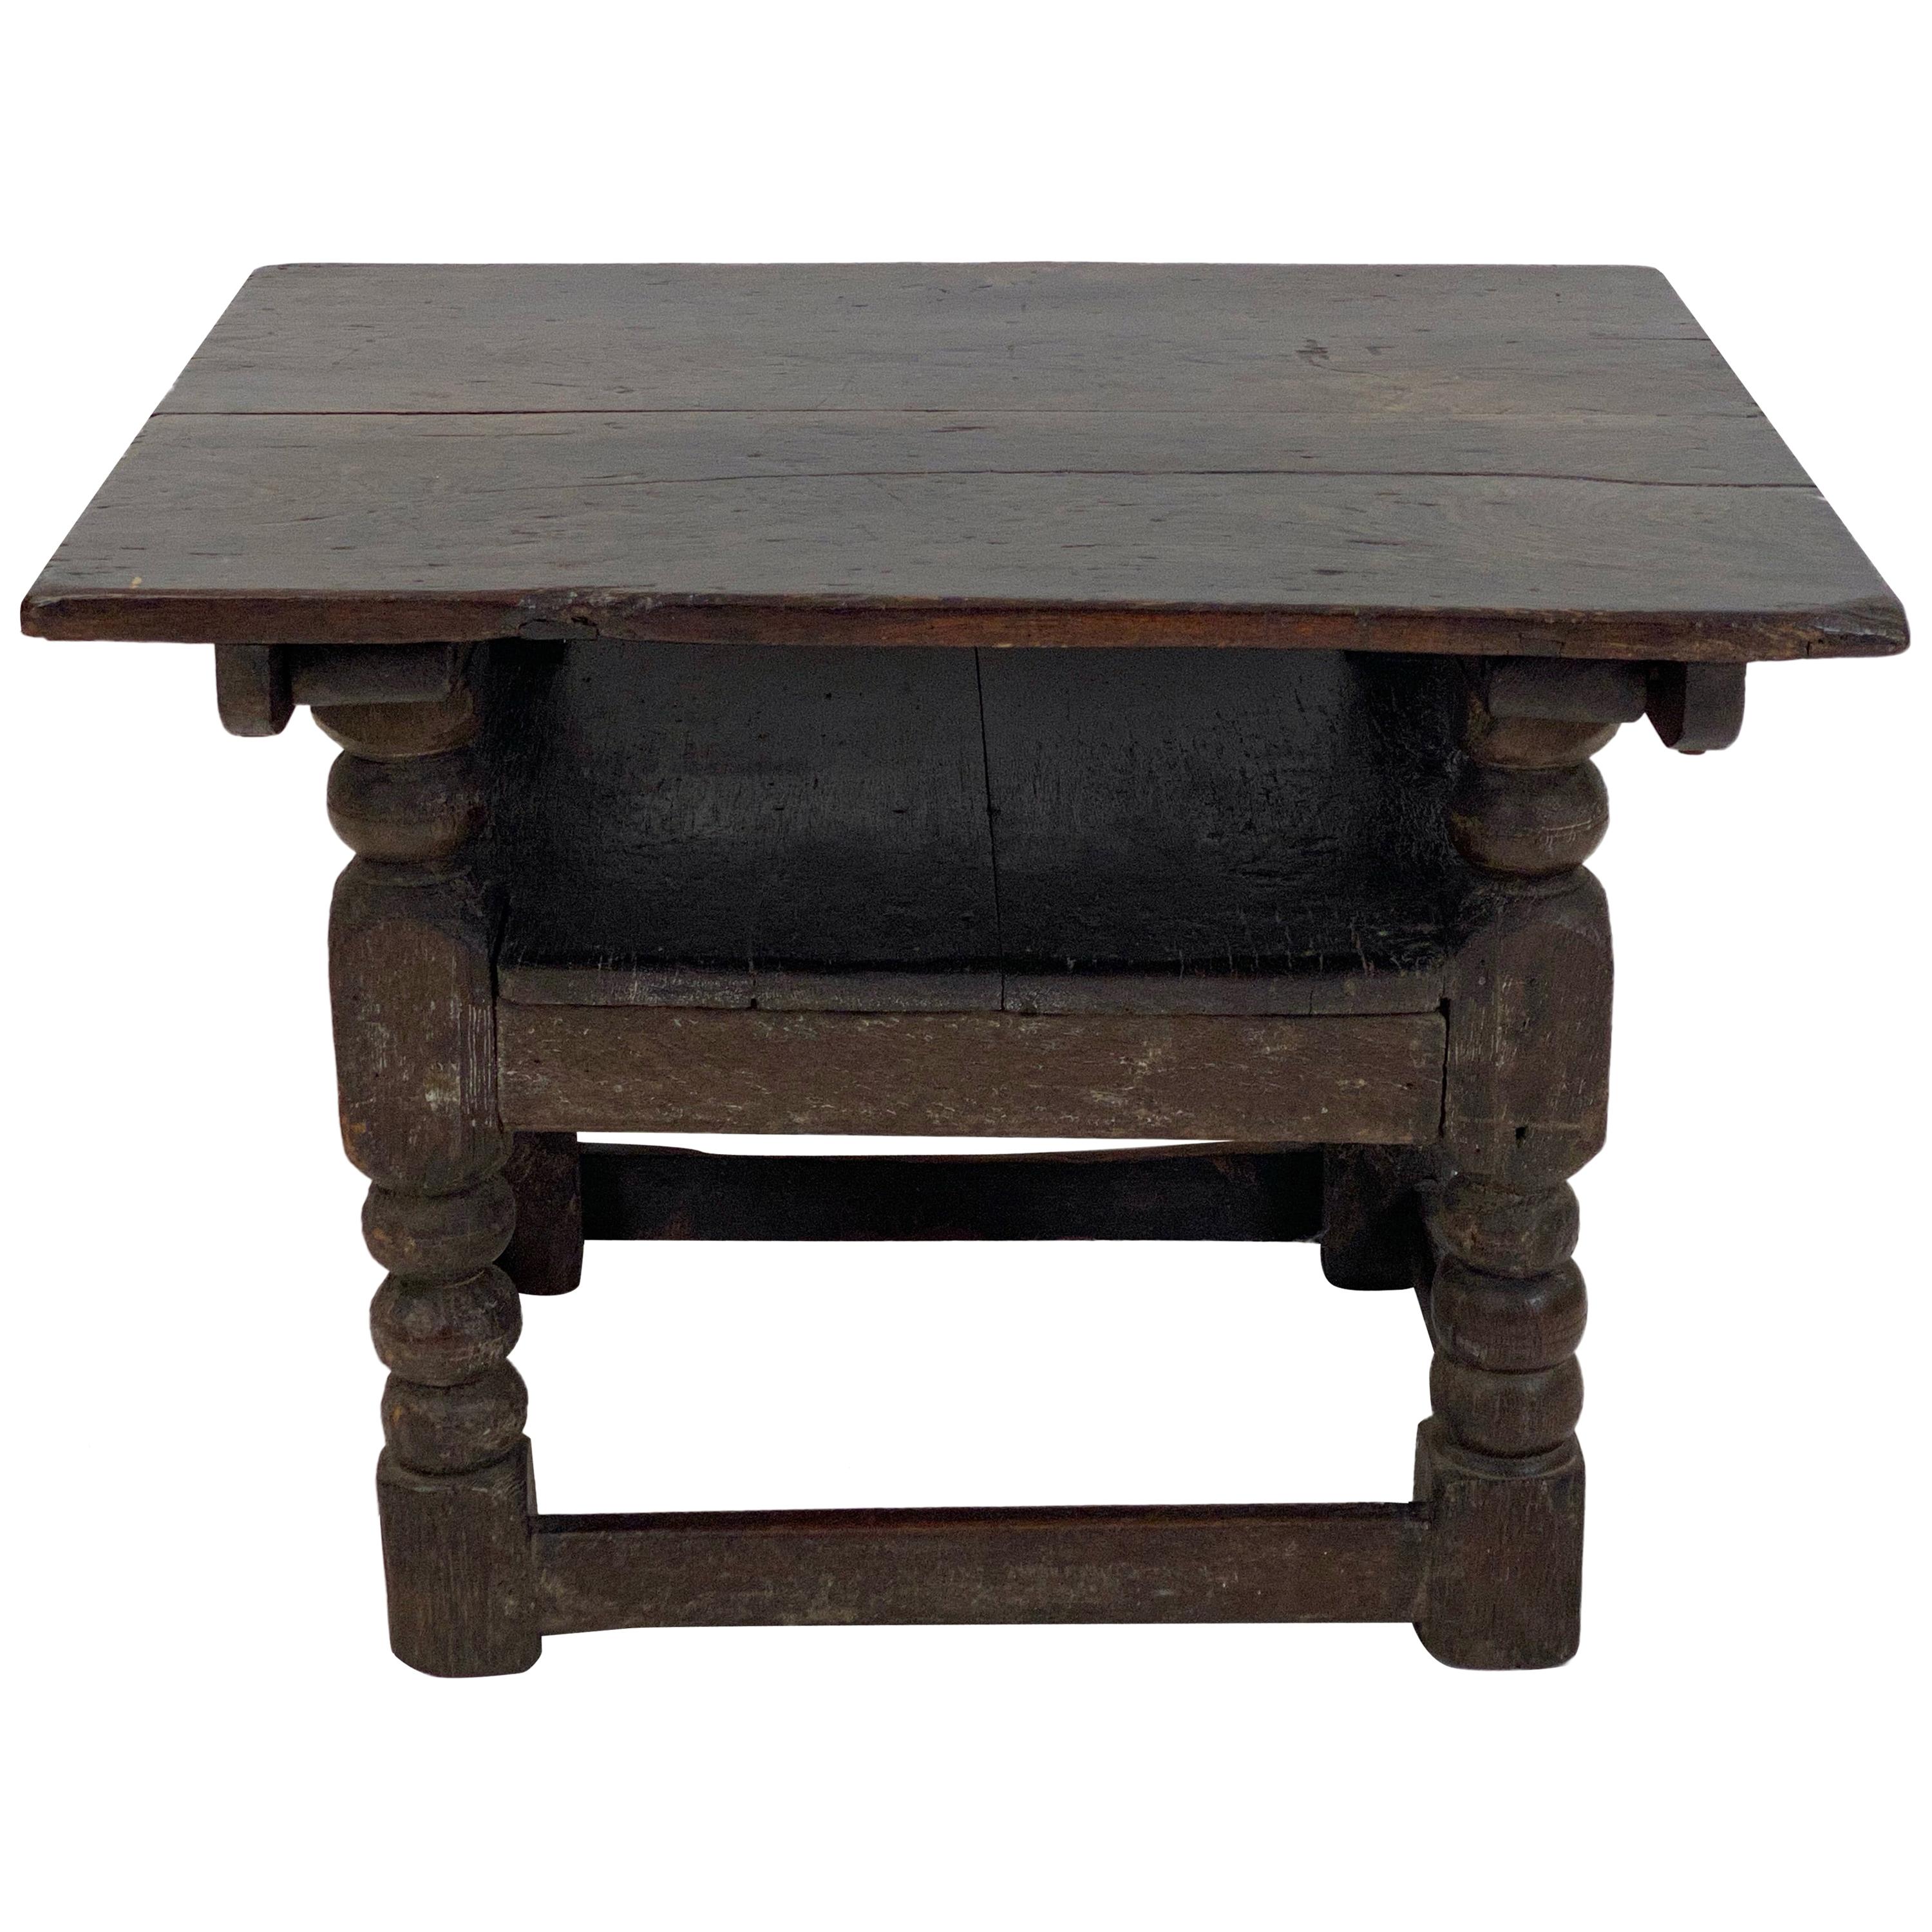 Antique Brutalist English Oak Refectory Table, 18 th Century